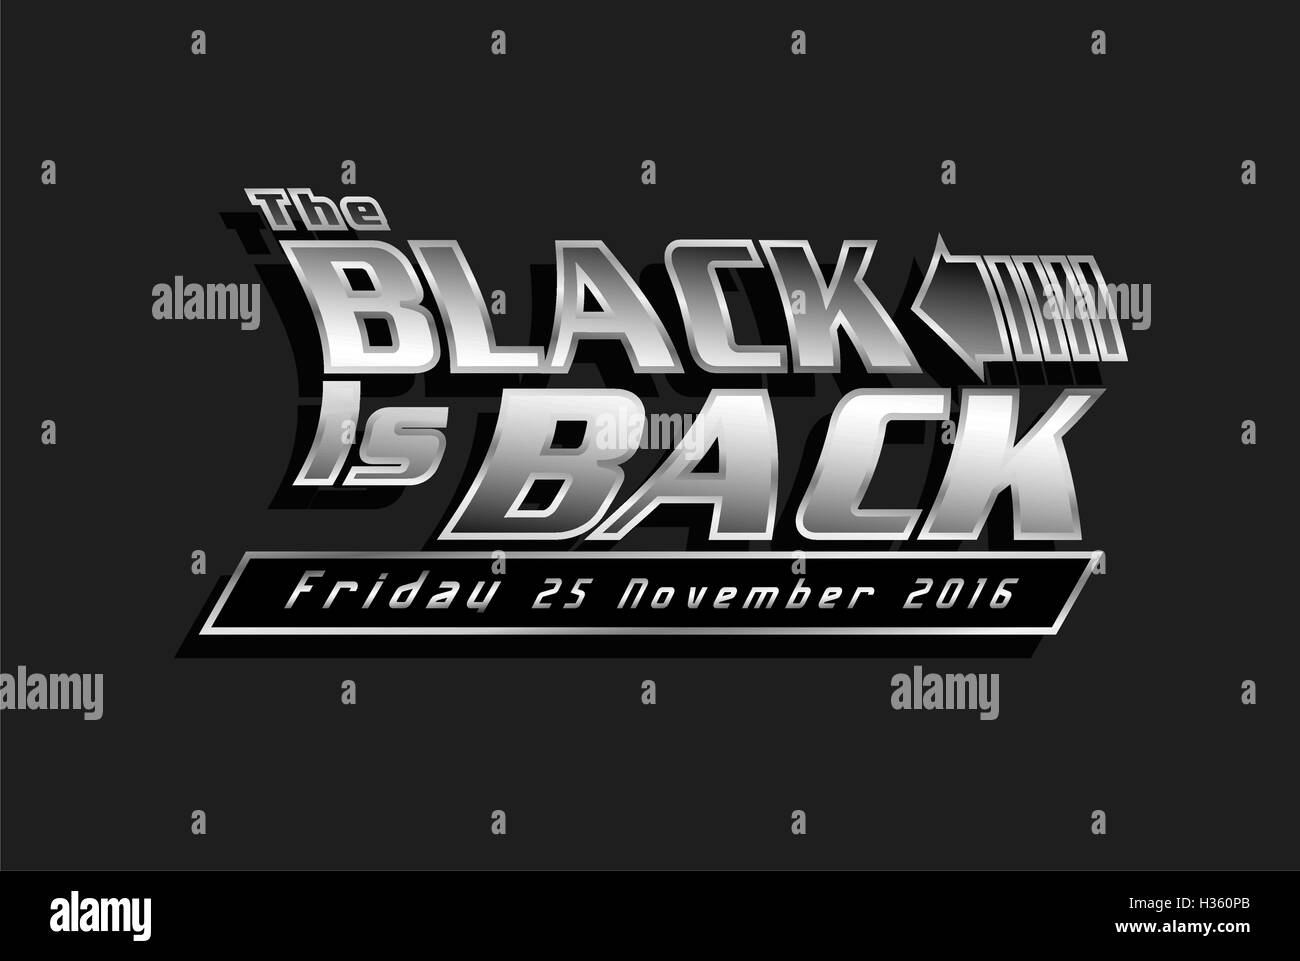 Black Friday Sale advertisement 25 November 2016. The black is back. Isolated. Poster illustration. Vector. Stock Vector